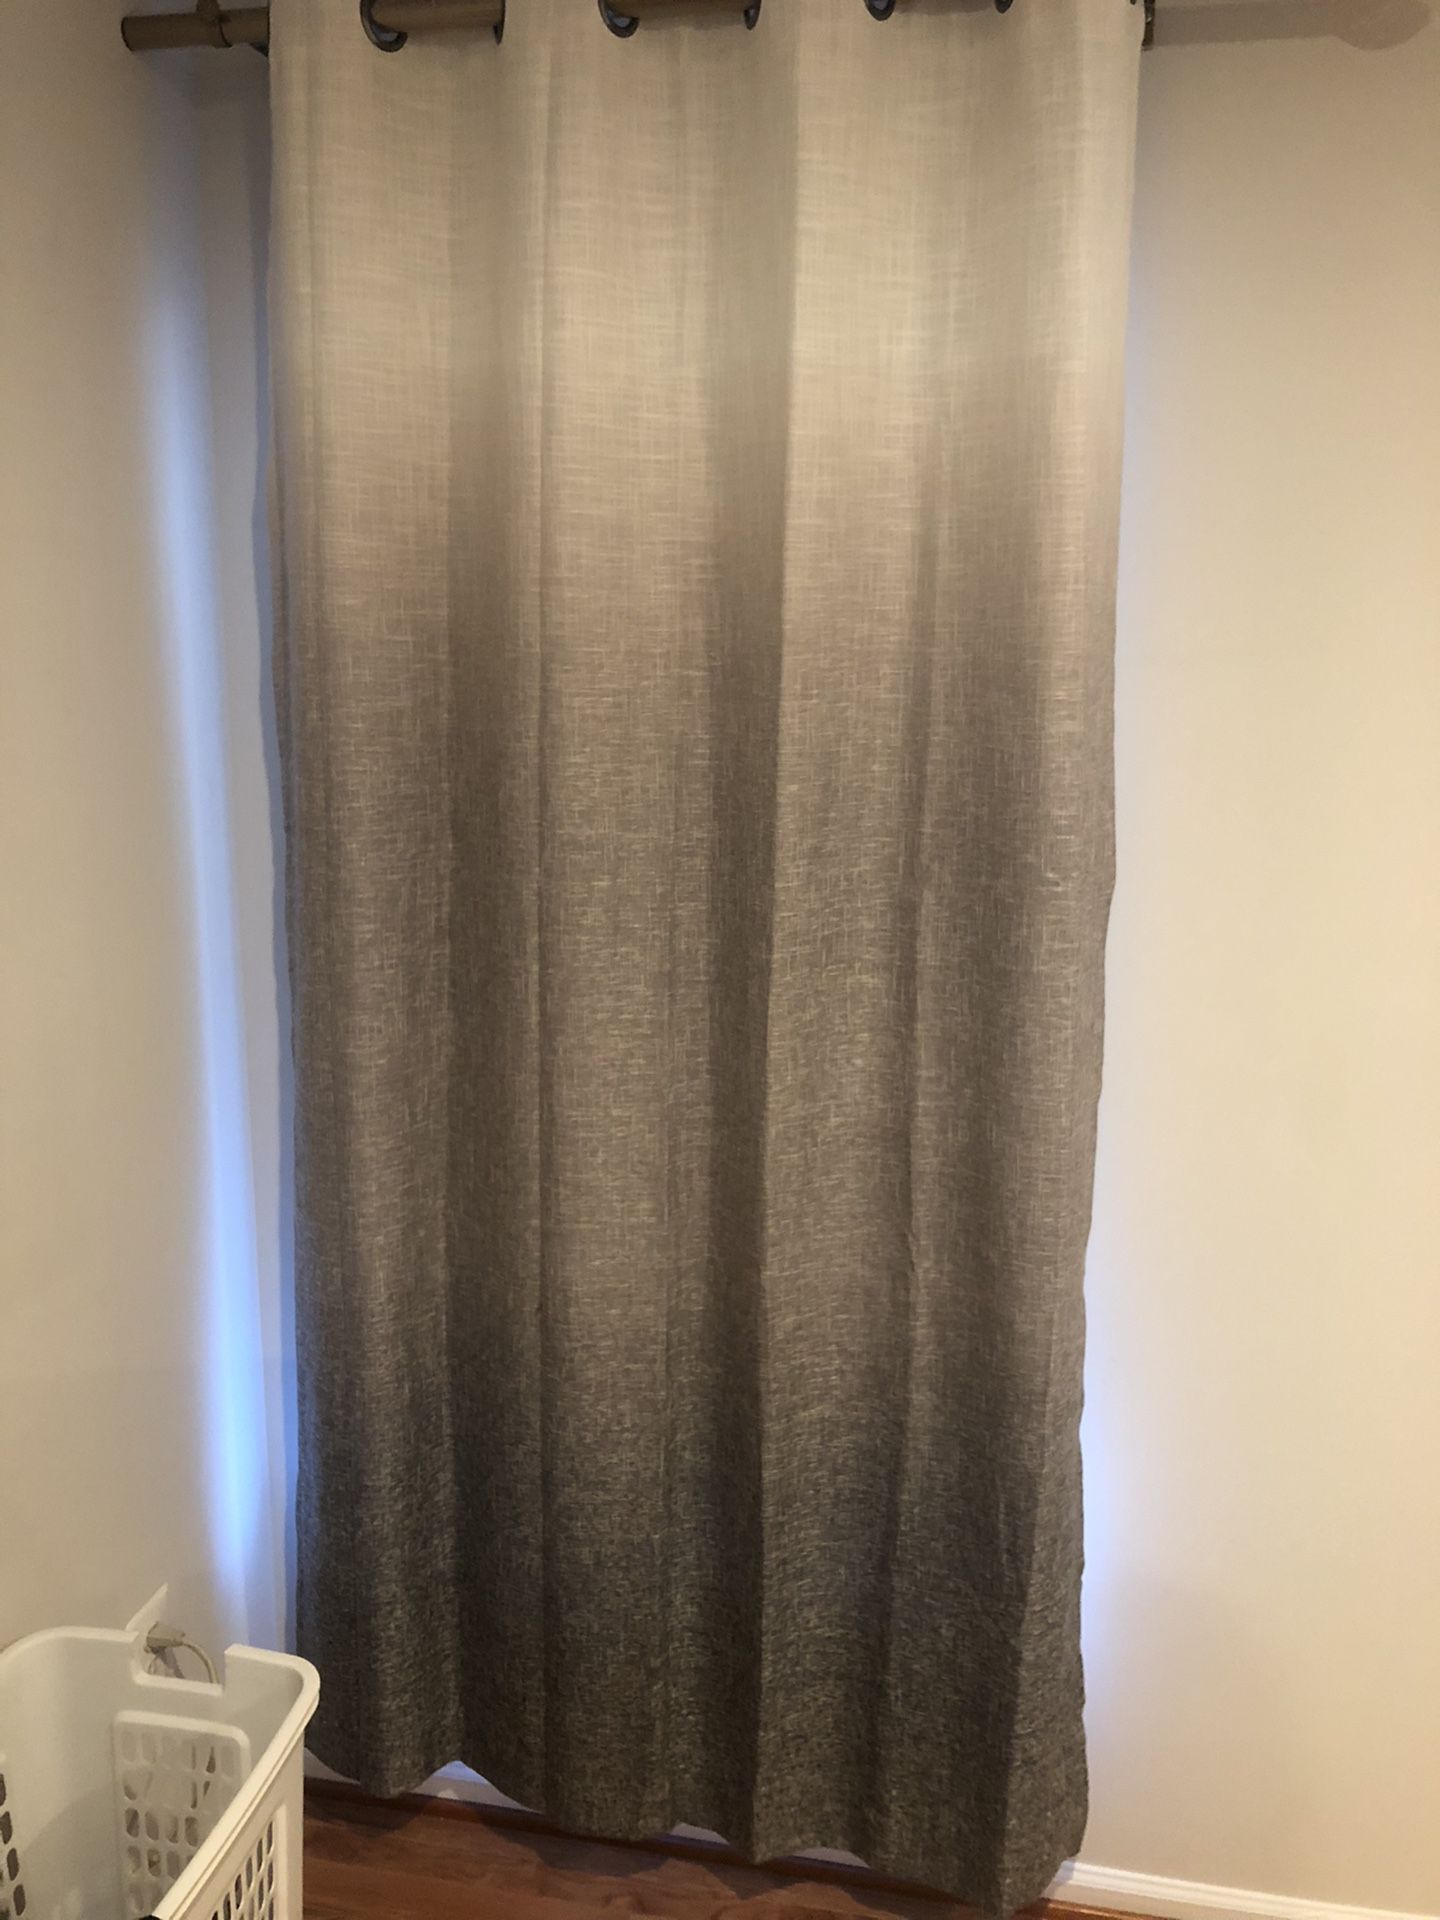 JCPenny brand new Ombré charcoal curtain